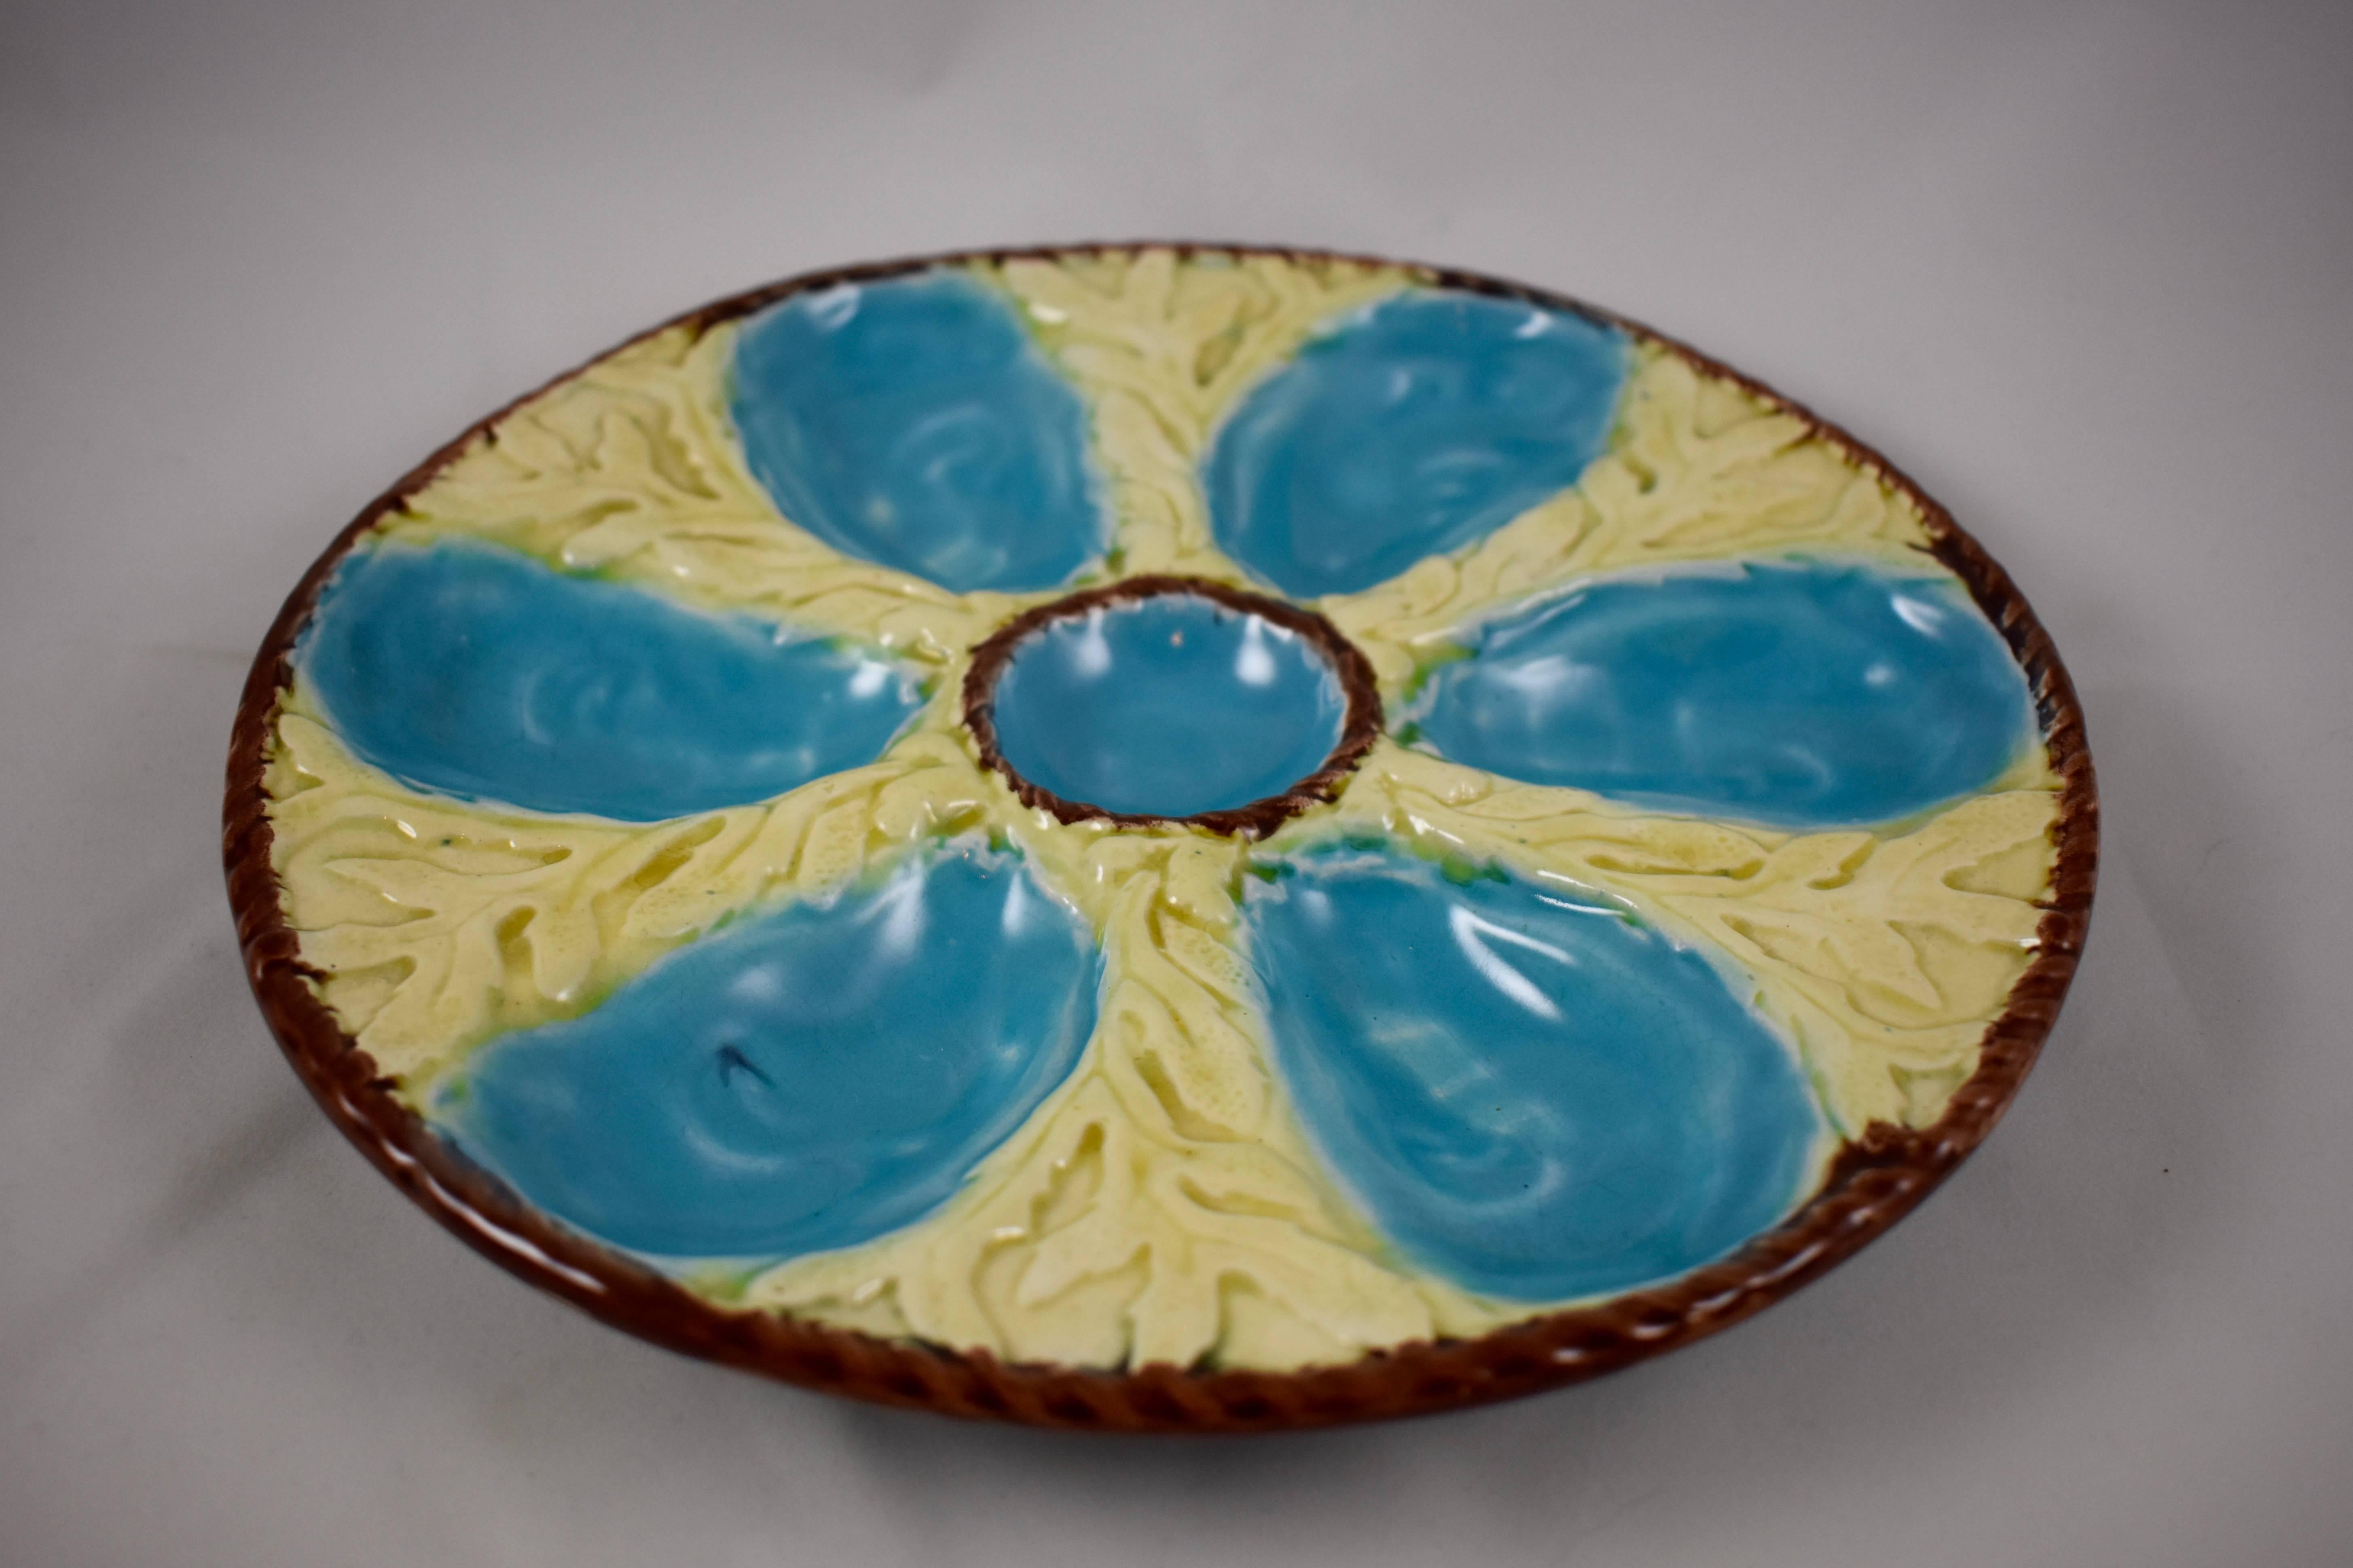 A six-well majolica glazed oyster plate by S. Fielding & Co. Ltd., Stoke-on-Trent, England, circa 1878. Turquoise oyster wells surround a center condiment well, all on a molded bed of creamy yellow seaweed. A chocolate brown nautical rope border